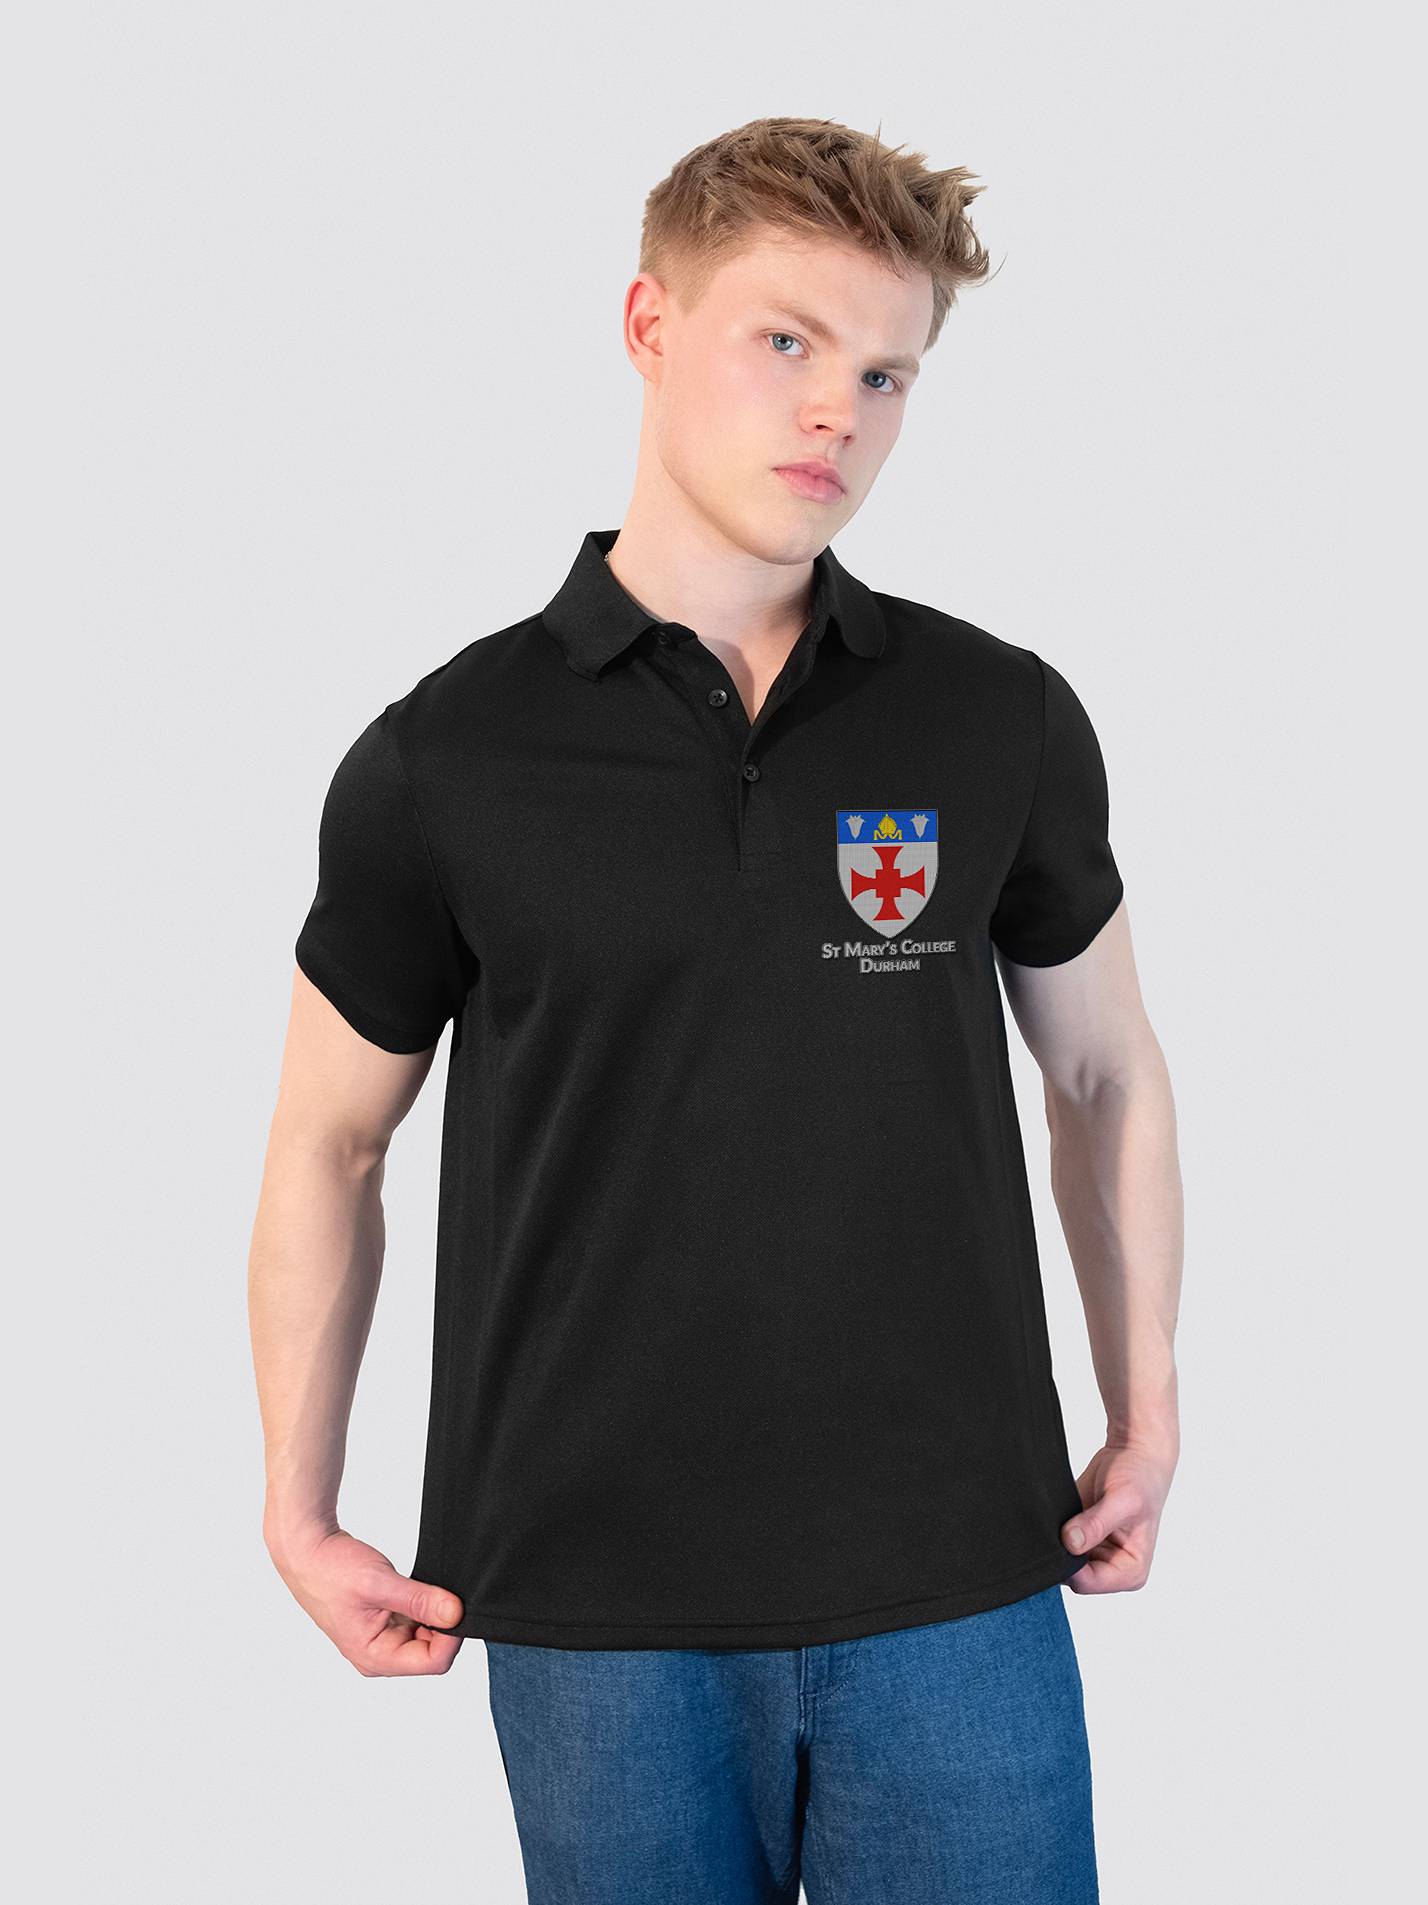 St Mary's College Durham Sustainable Men's Polo Shirt